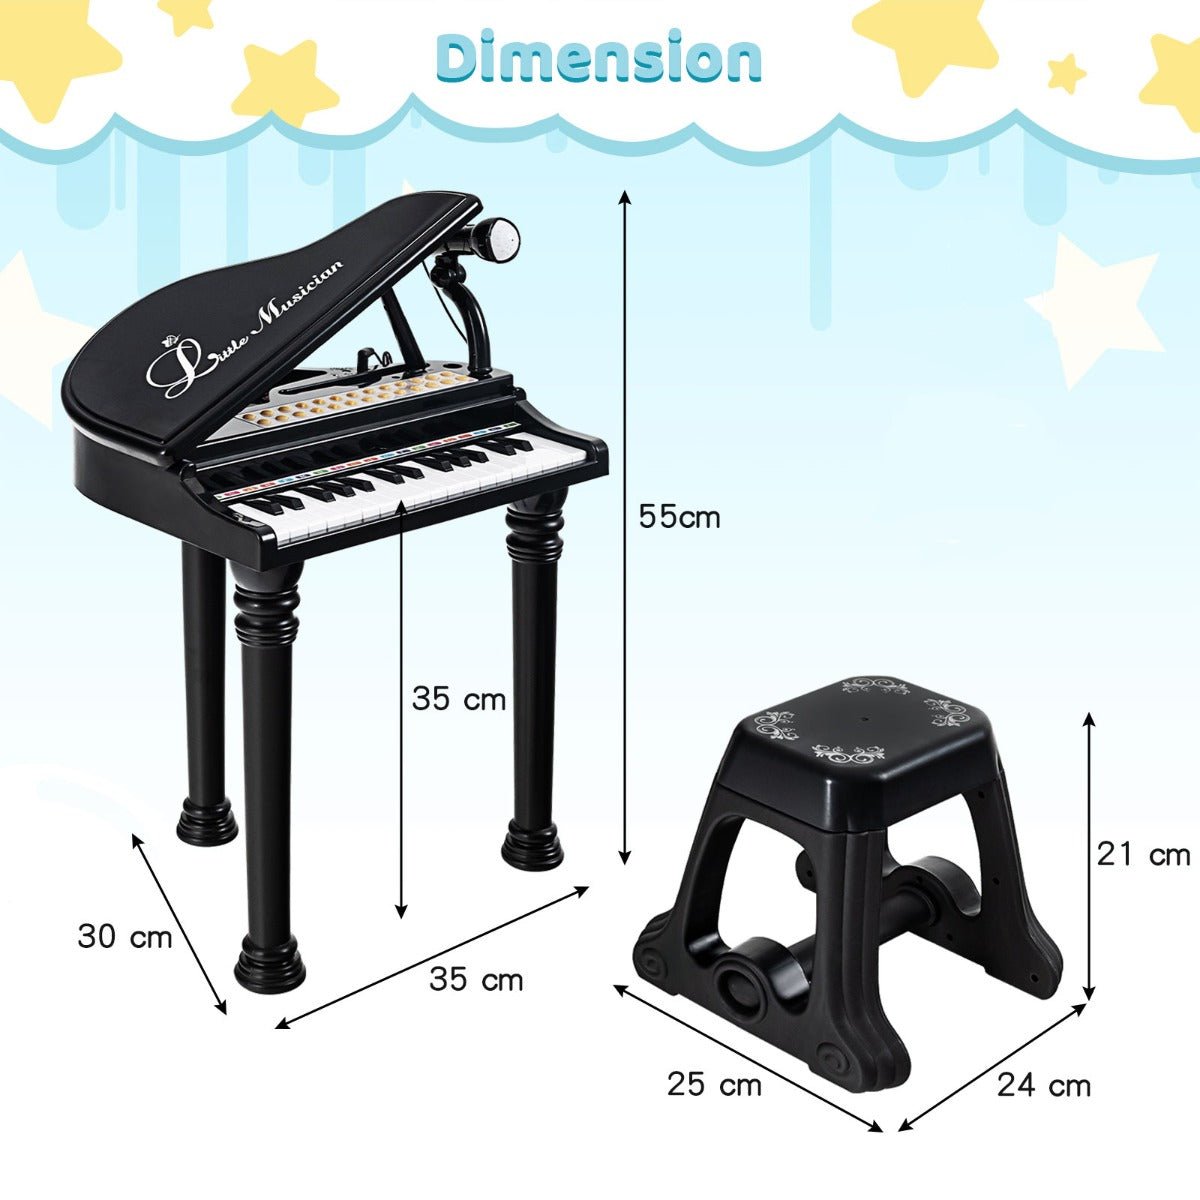 Get the Kids Black Piano Keyboard with Microphone for Budding Musicians